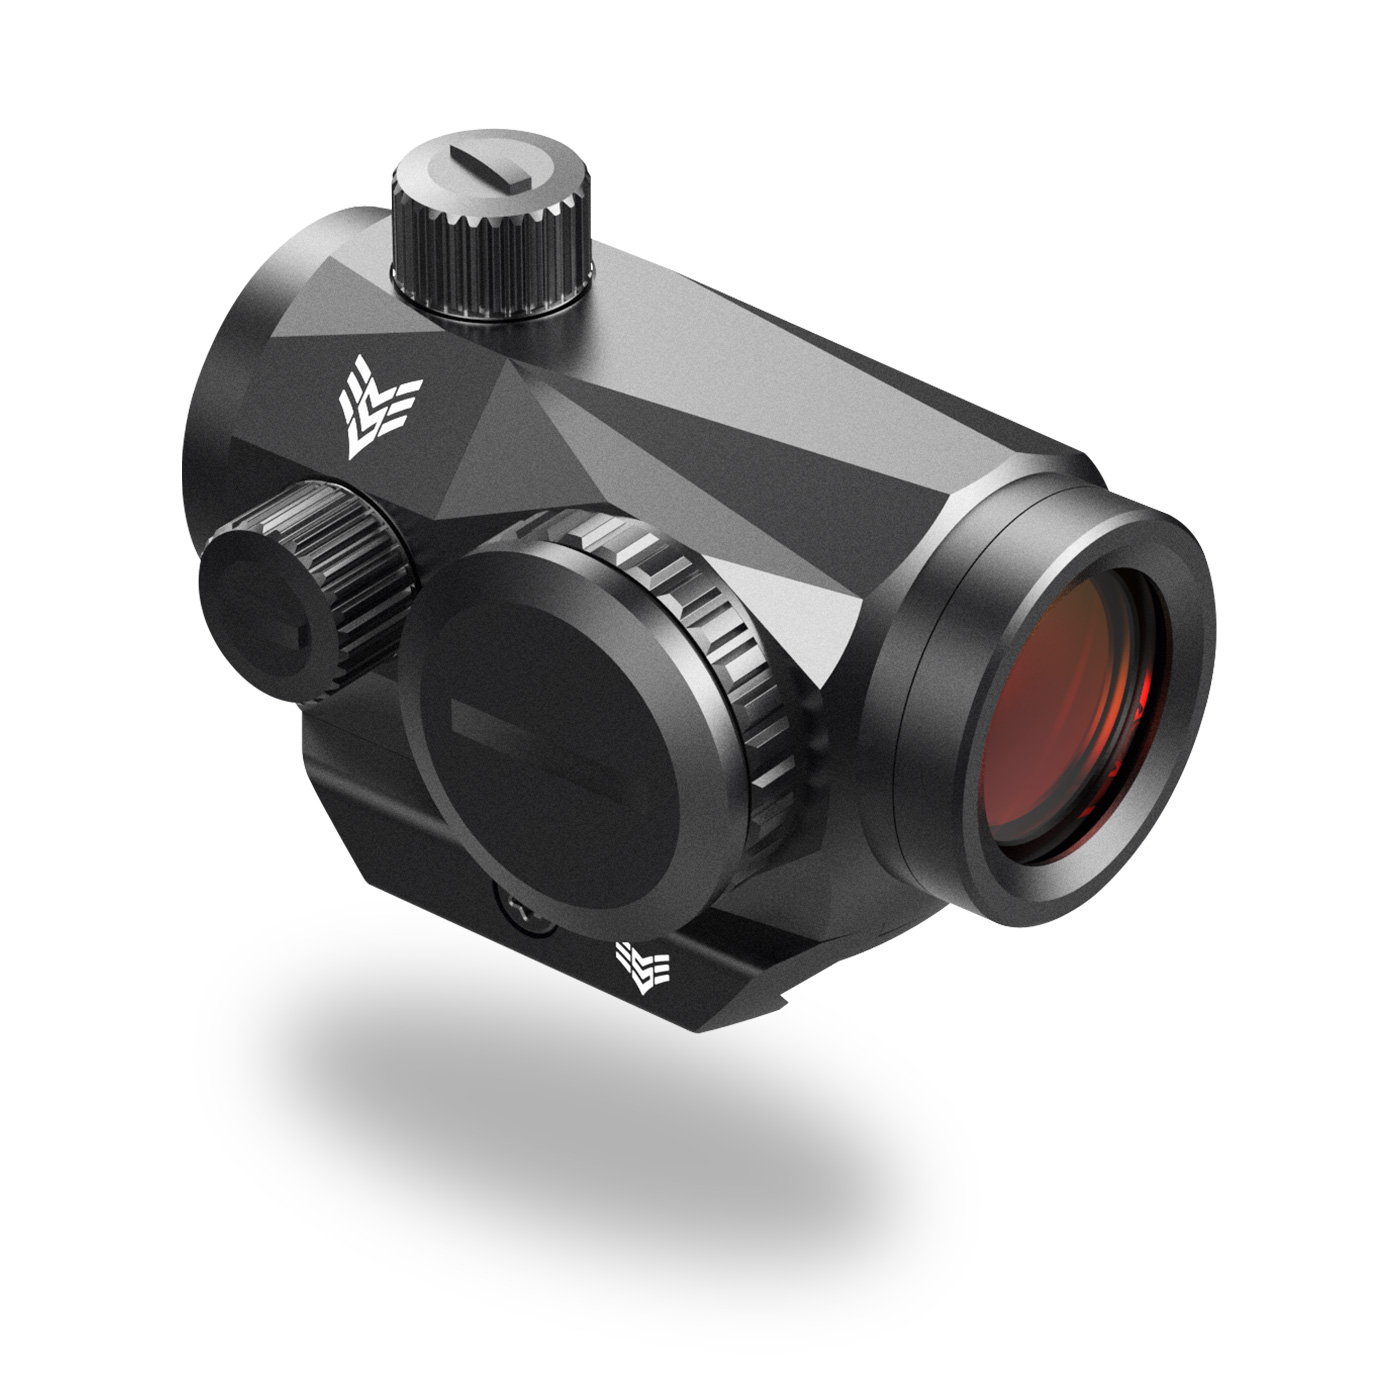 Swampfox Liberator 1x22mm Red Dot Sight | Up to 20% Off 4.6 Star ...